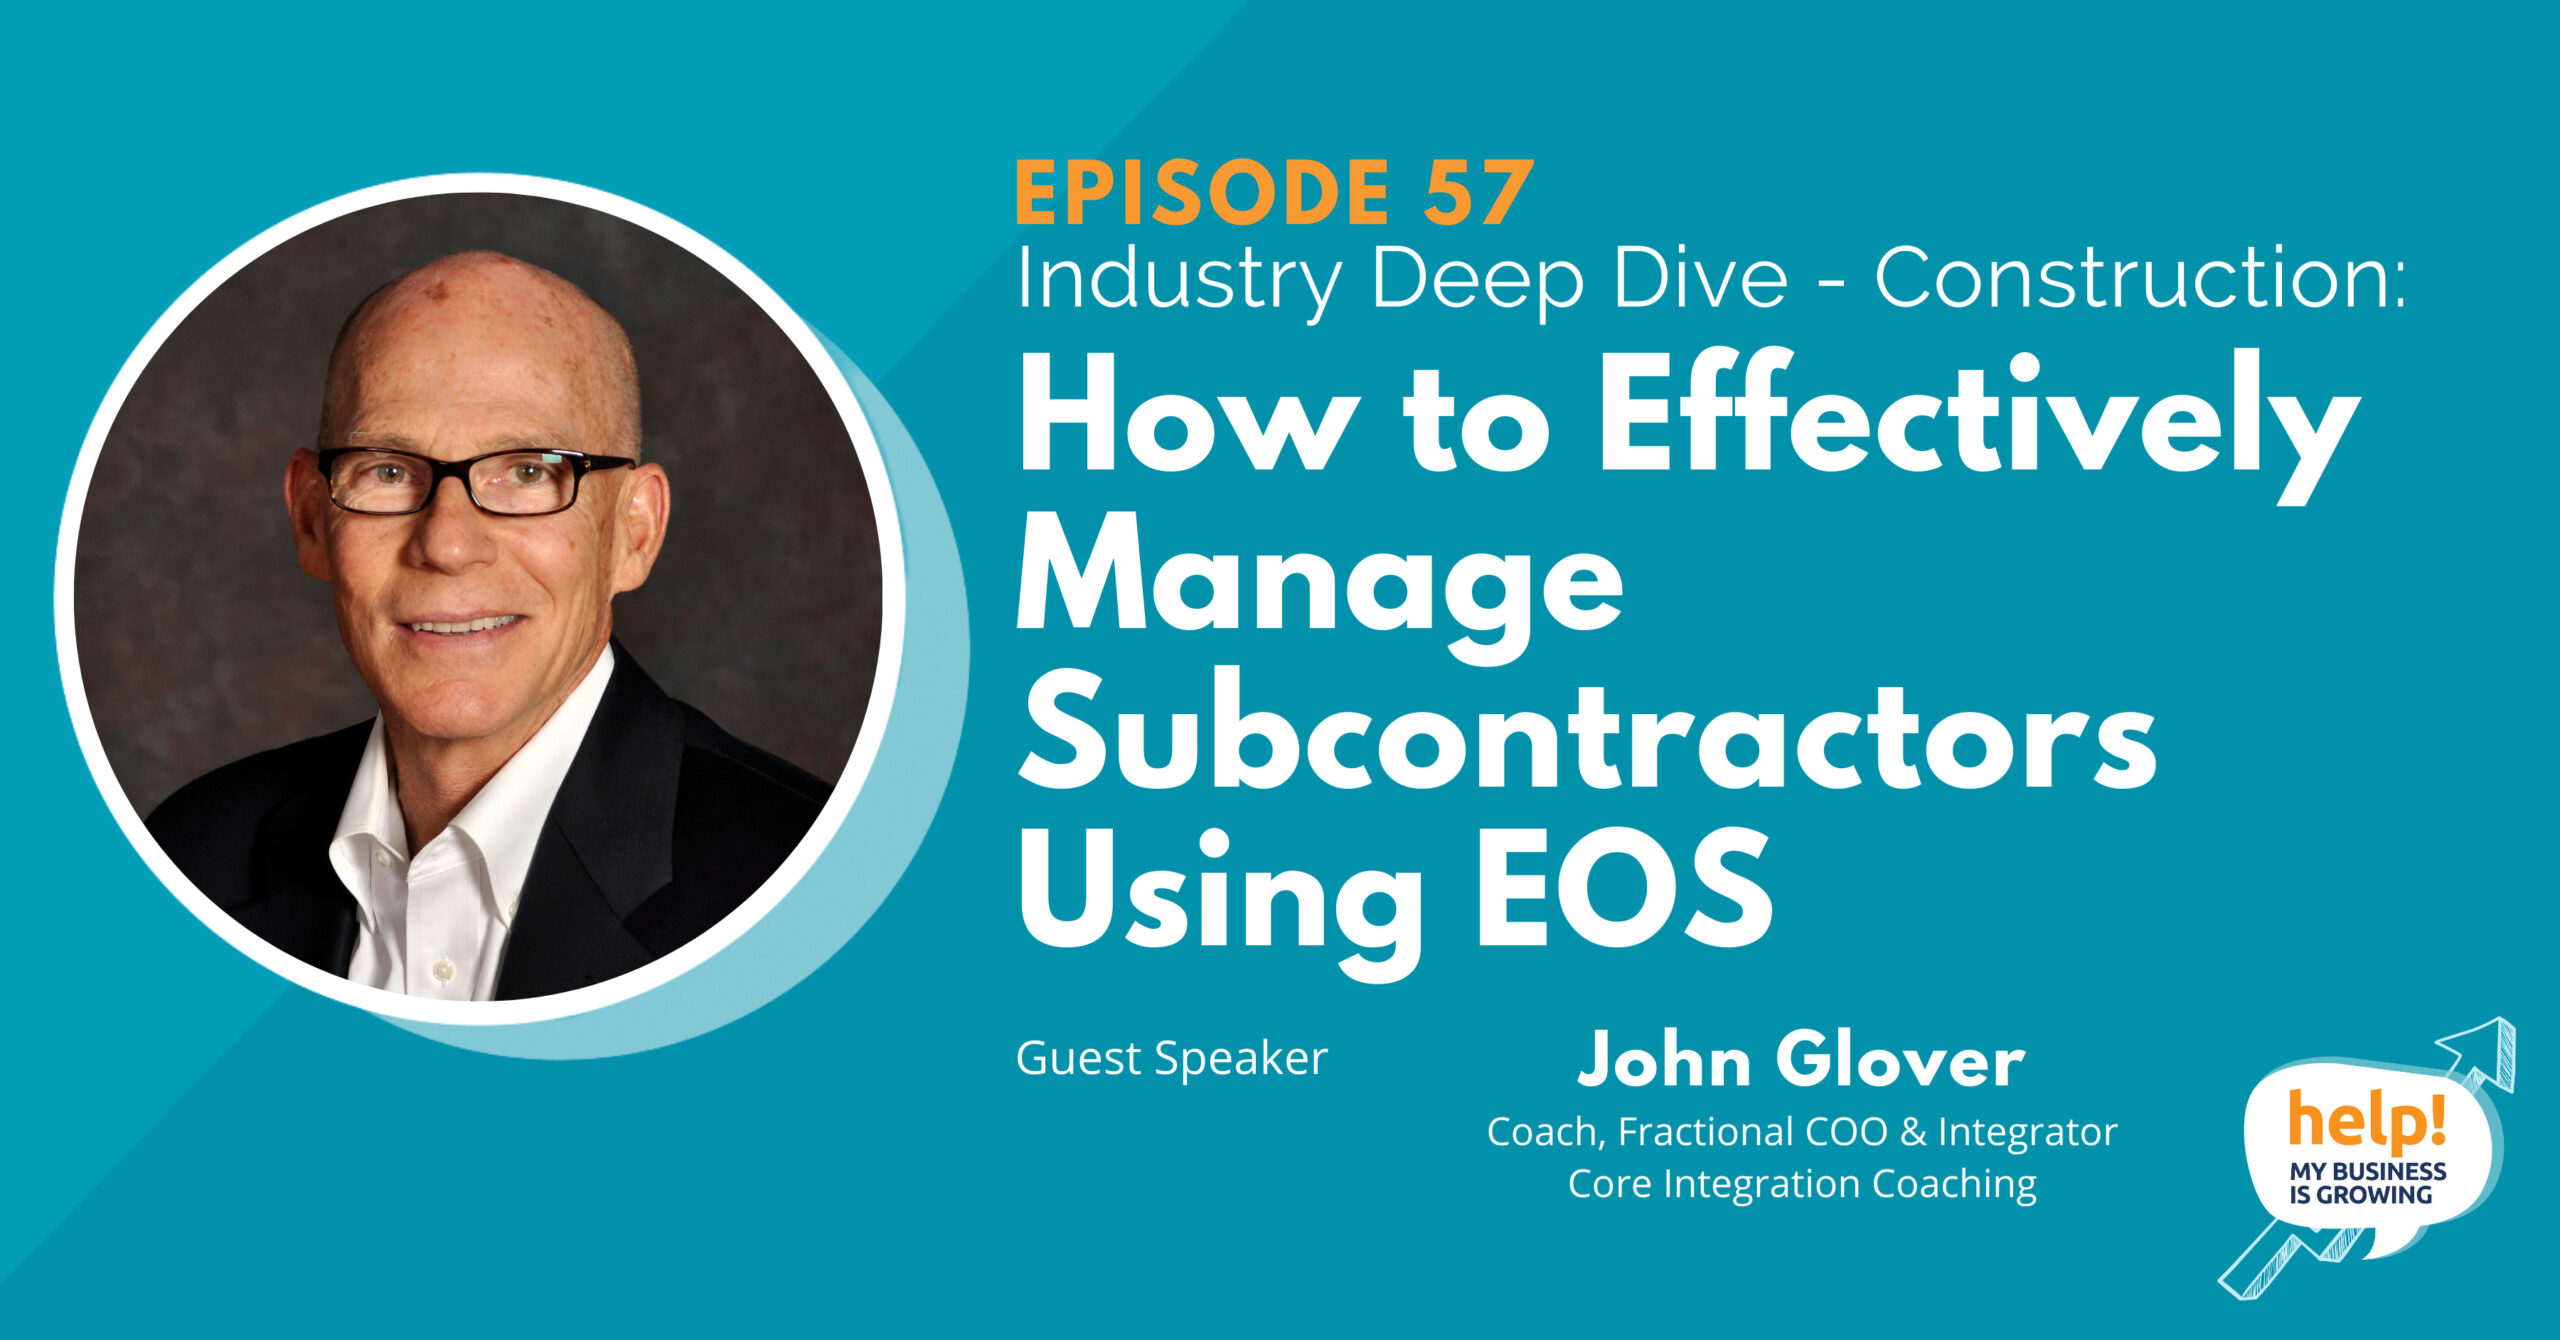 Industry Deep Dive - Construction: How to Effectively Manage Subcontractors Using EOS 